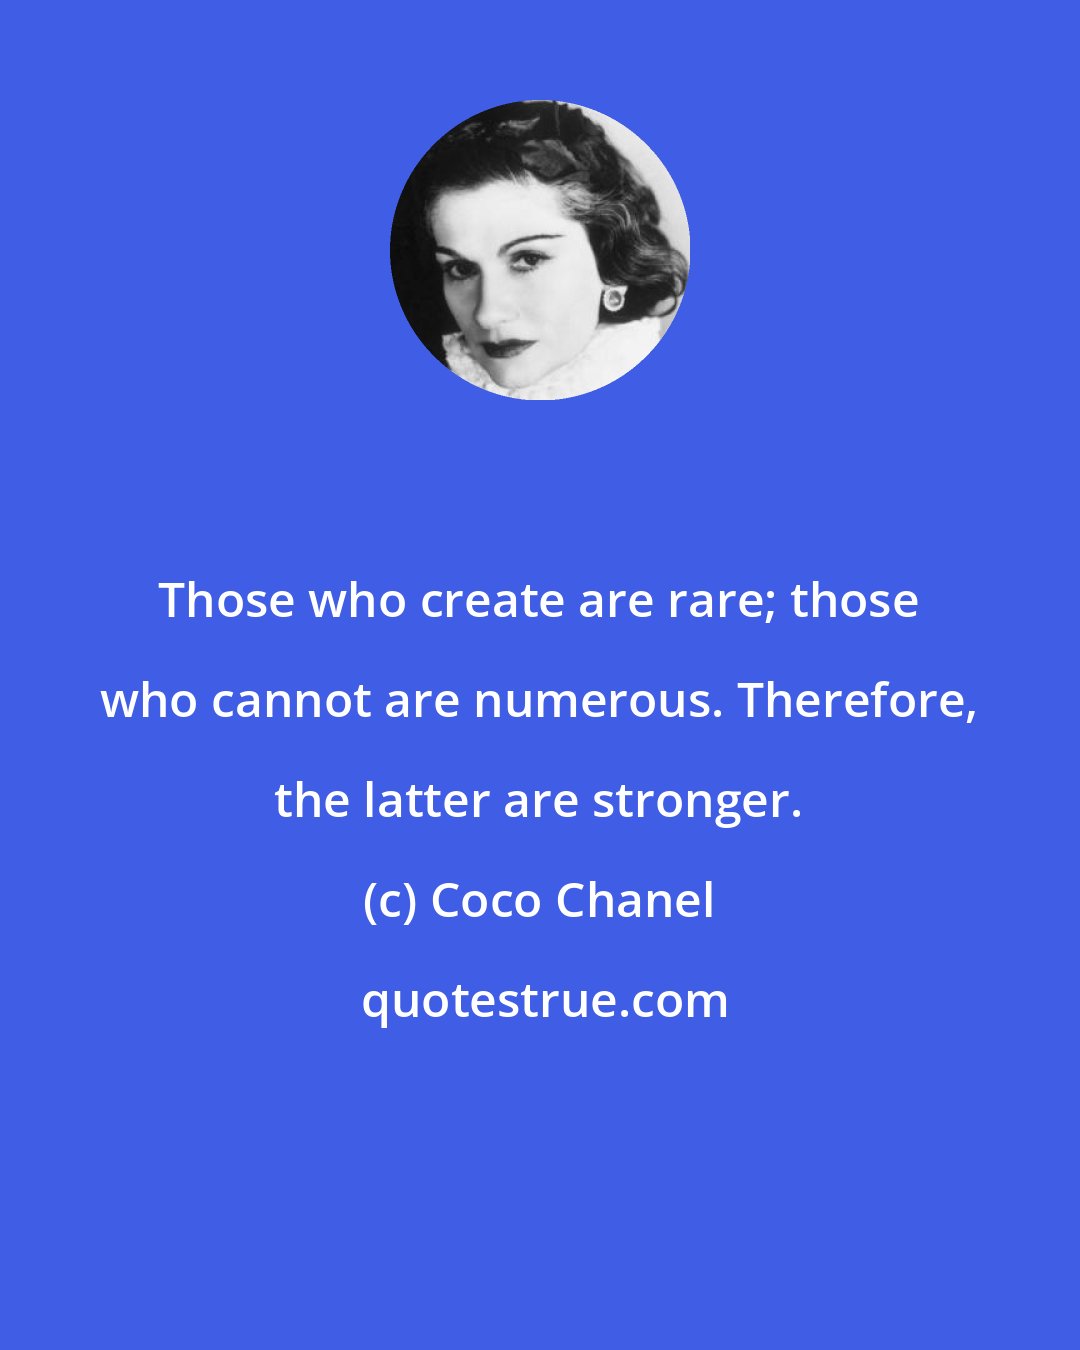 Coco Chanel: Those who create are rare; those who cannot are numerous. Therefore, the latter are stronger.